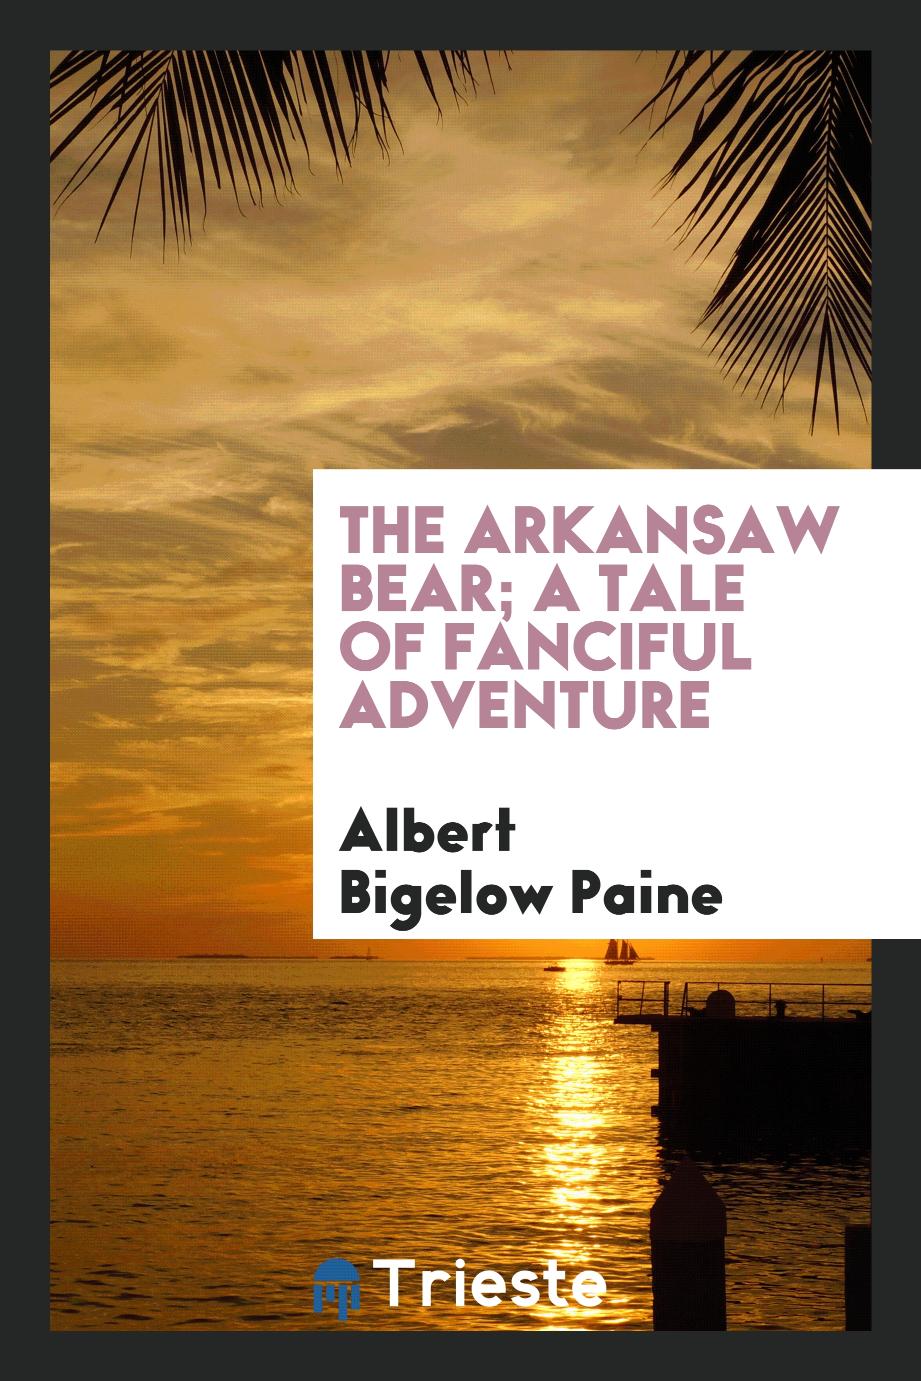 The Arkansaw bear; a tale of fanciful adventure